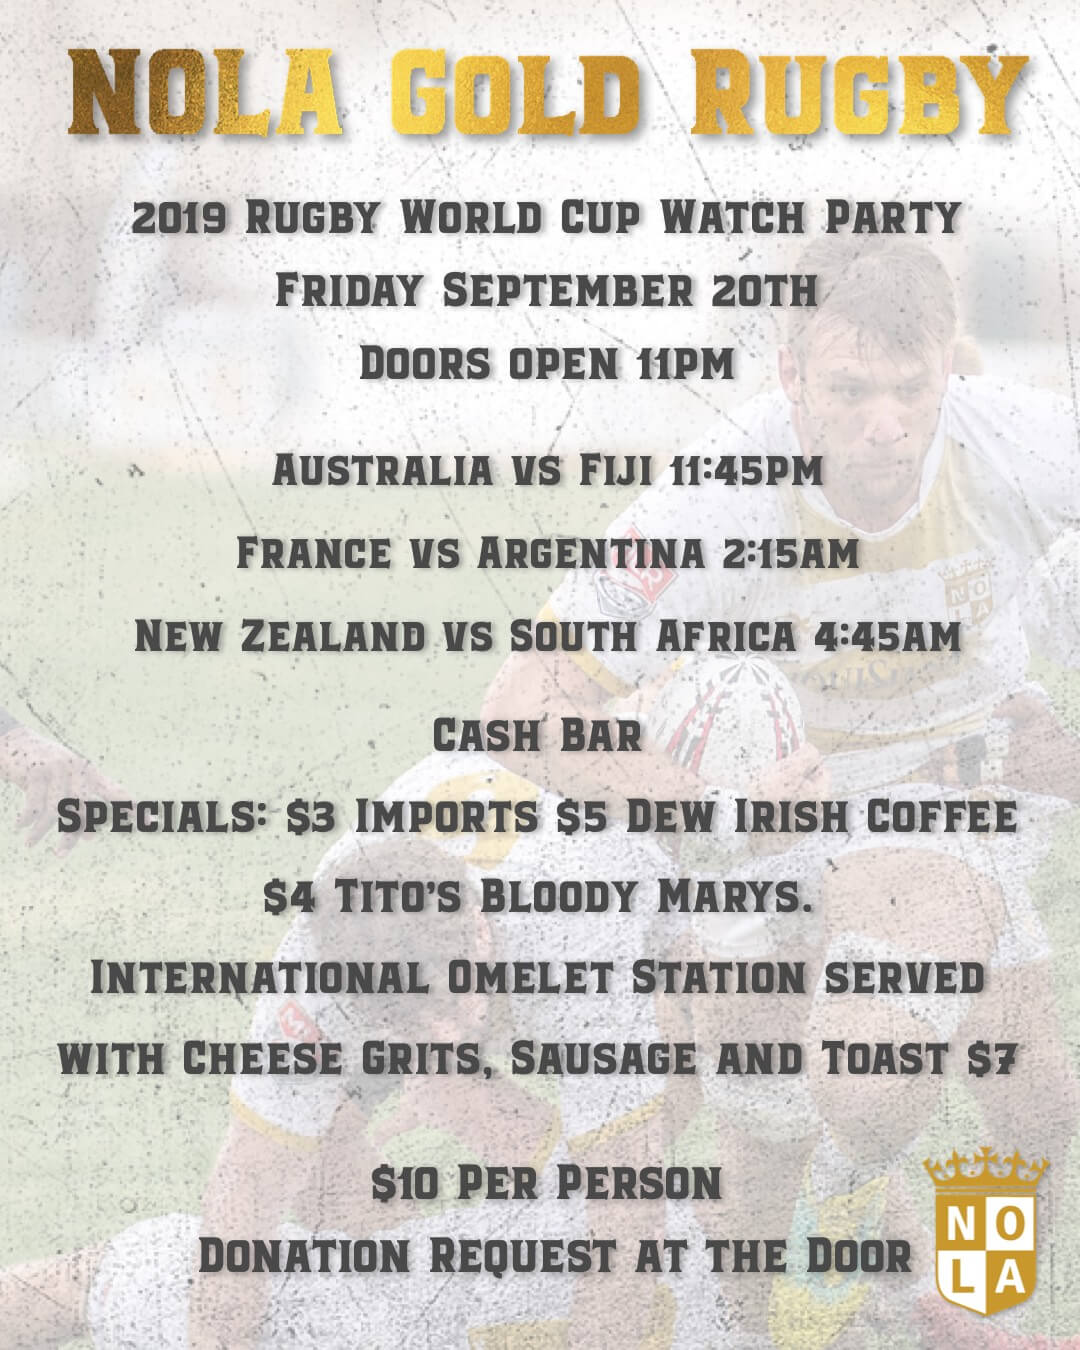 RUGBY World Cup Watch Party